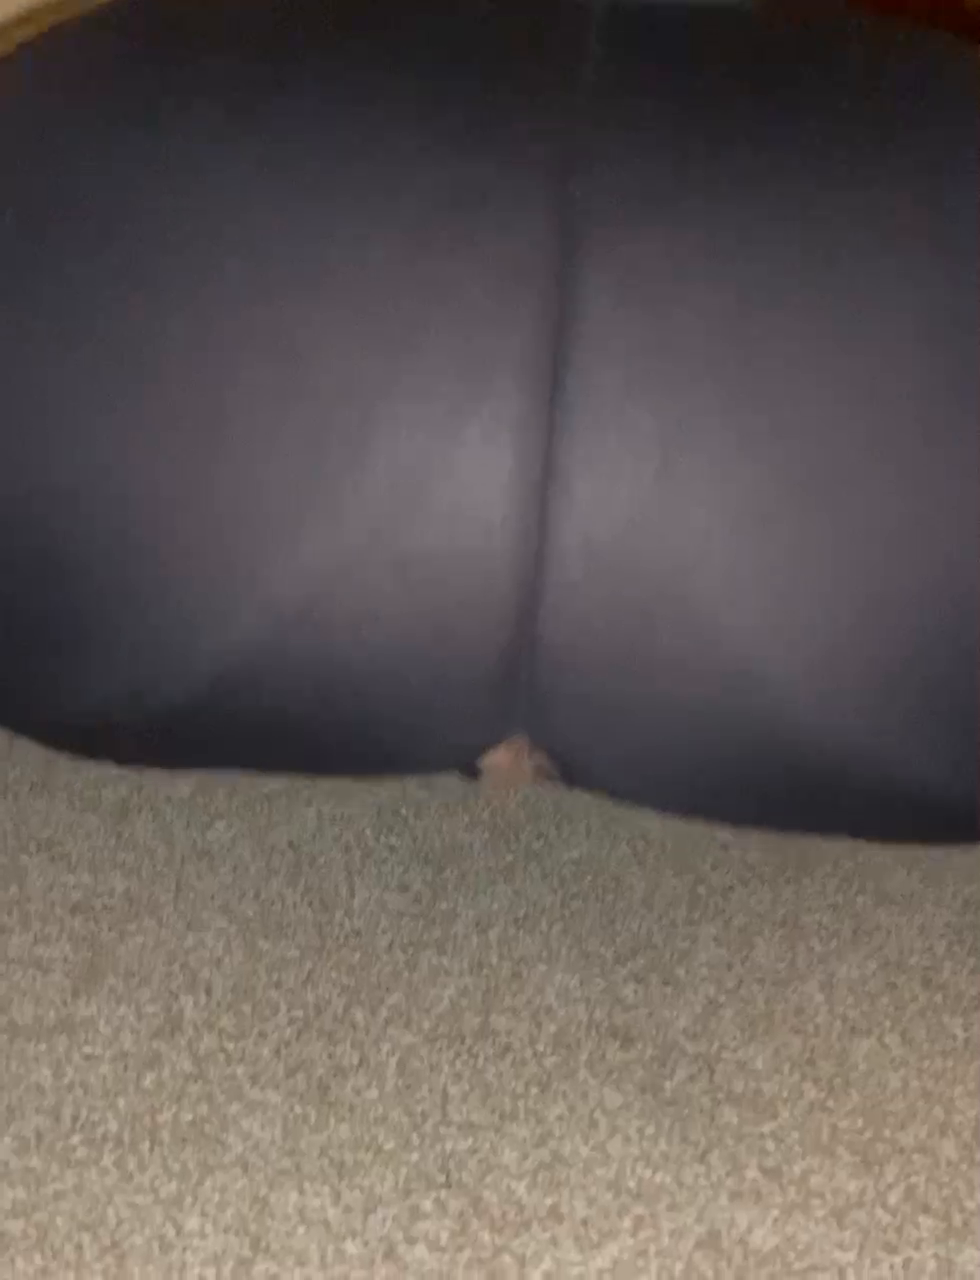 Video by Kimthemilf with the username @Kimthemilf, who is a verified user,  August 29, 2020 at 2:36 PM. The post is about the topic MILF and the text says 'Its also really important to stretch after excercise.

I like to be stretched during too sometimes!!'